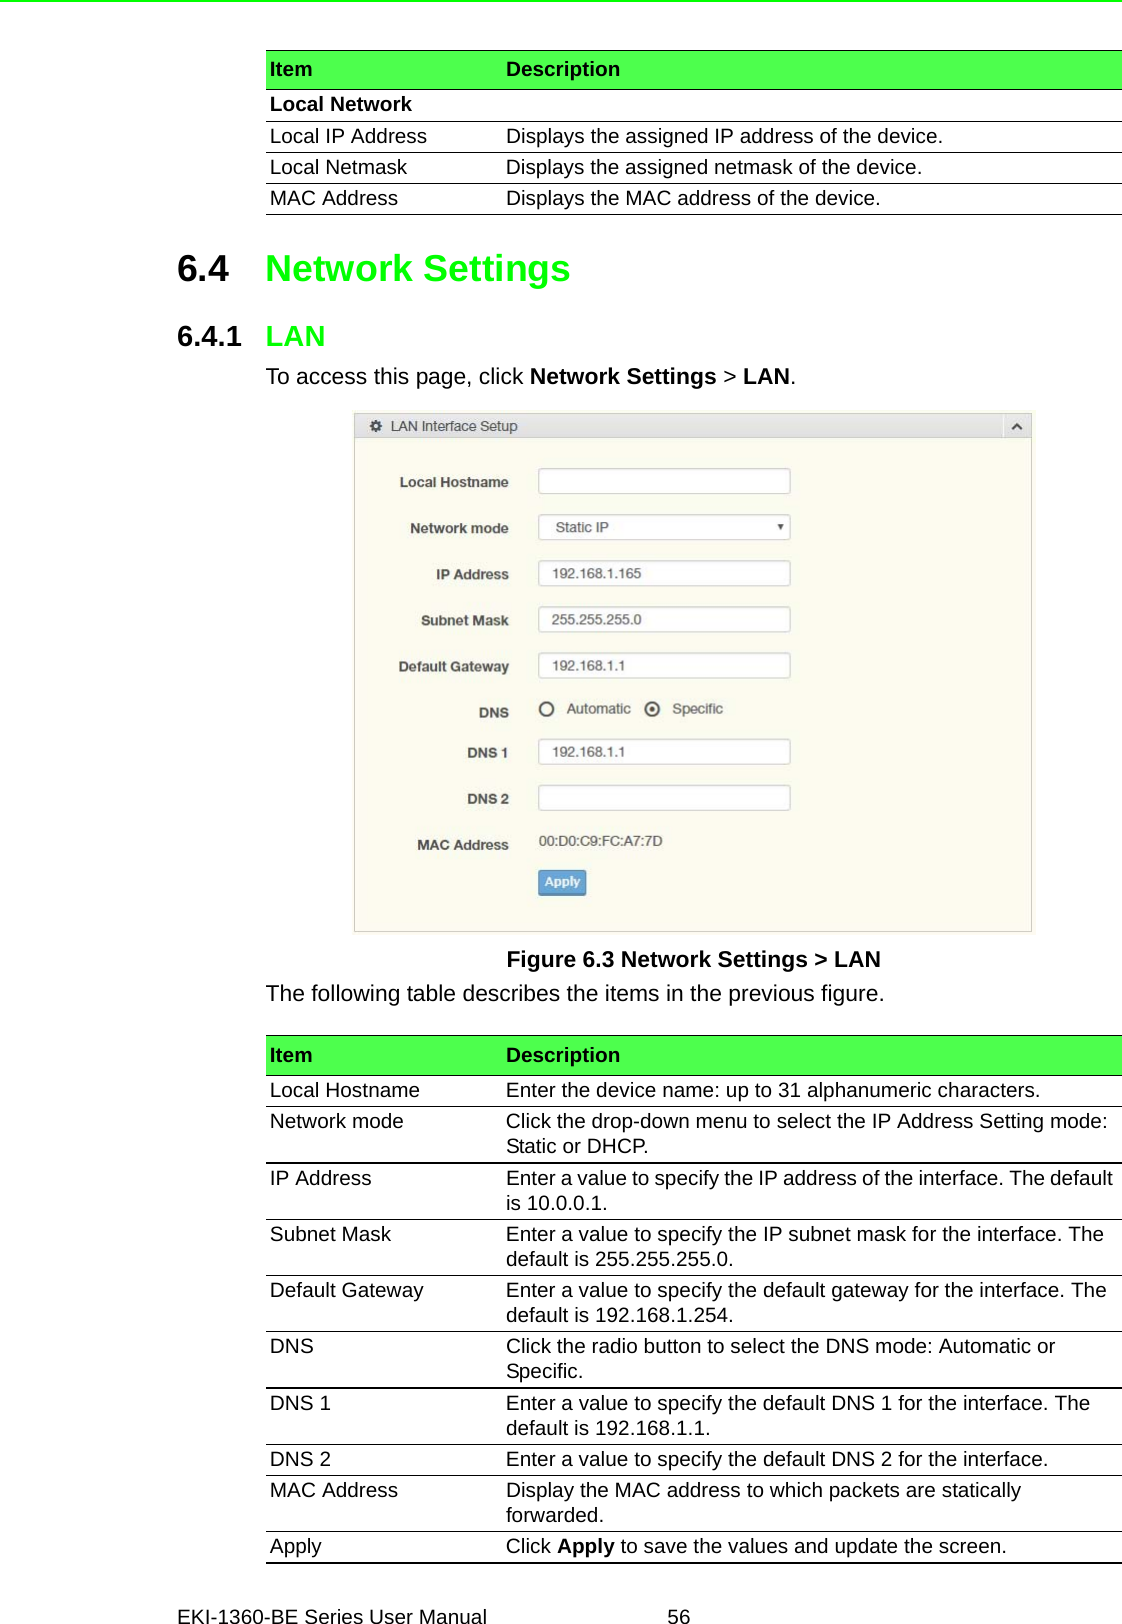 EKI-1360-BE Series User Manual 566.4 Network Settings6.4.1 LANTo access this page, click Network Settings &gt; LAN.Figure 6.3 Network Settings &gt; LANThe following table describes the items in the previous figure.Local NetworkLocal IP Address Displays the assigned IP address of the device.Local Netmask Displays the assigned netmask of the device.MAC Address Displays the MAC address of the device.Item DescriptionItem DescriptionLocal Hostname Enter the device name: up to 31 alphanumeric characters.Network mode Click the drop-down menu to select the IP Address Setting mode: Static or DHCP.IP Address Enter a value to specify the IP address of the interface. The default is 10.0.0.1.Subnet Mask Enter a value to specify the IP subnet mask for the interface. The default is 255.255.255.0.Default Gateway Enter a value to specify the default gateway for the interface. The default is 192.168.1.254.DNS Click the radio button to select the DNS mode: Automatic or Specific.DNS 1 Enter a value to specify the default DNS 1 for the interface. The default is 192.168.1.1.DNS 2 Enter a value to specify the default DNS 2 for the interface.MAC Address Display the MAC address to which packets are statically forwarded.Apply Click Apply to save the values and update the screen.